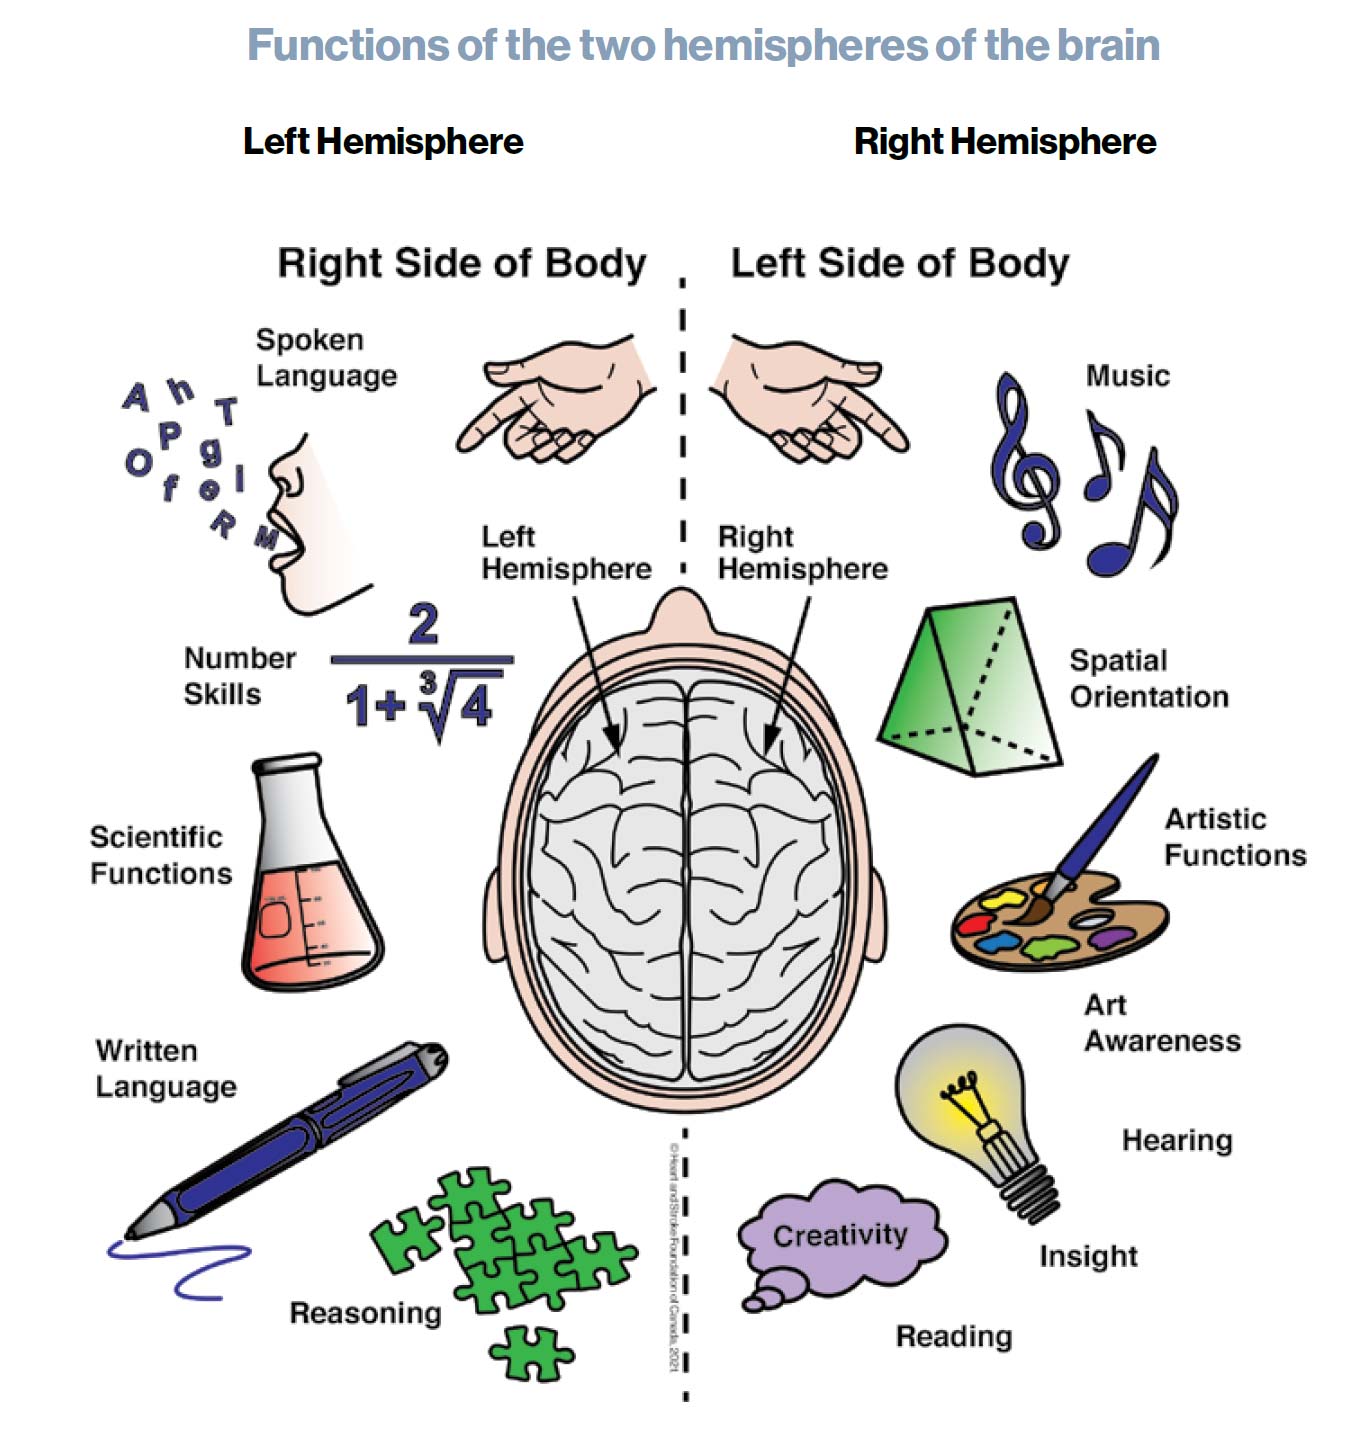 Functions of the two hemispheres of the brain